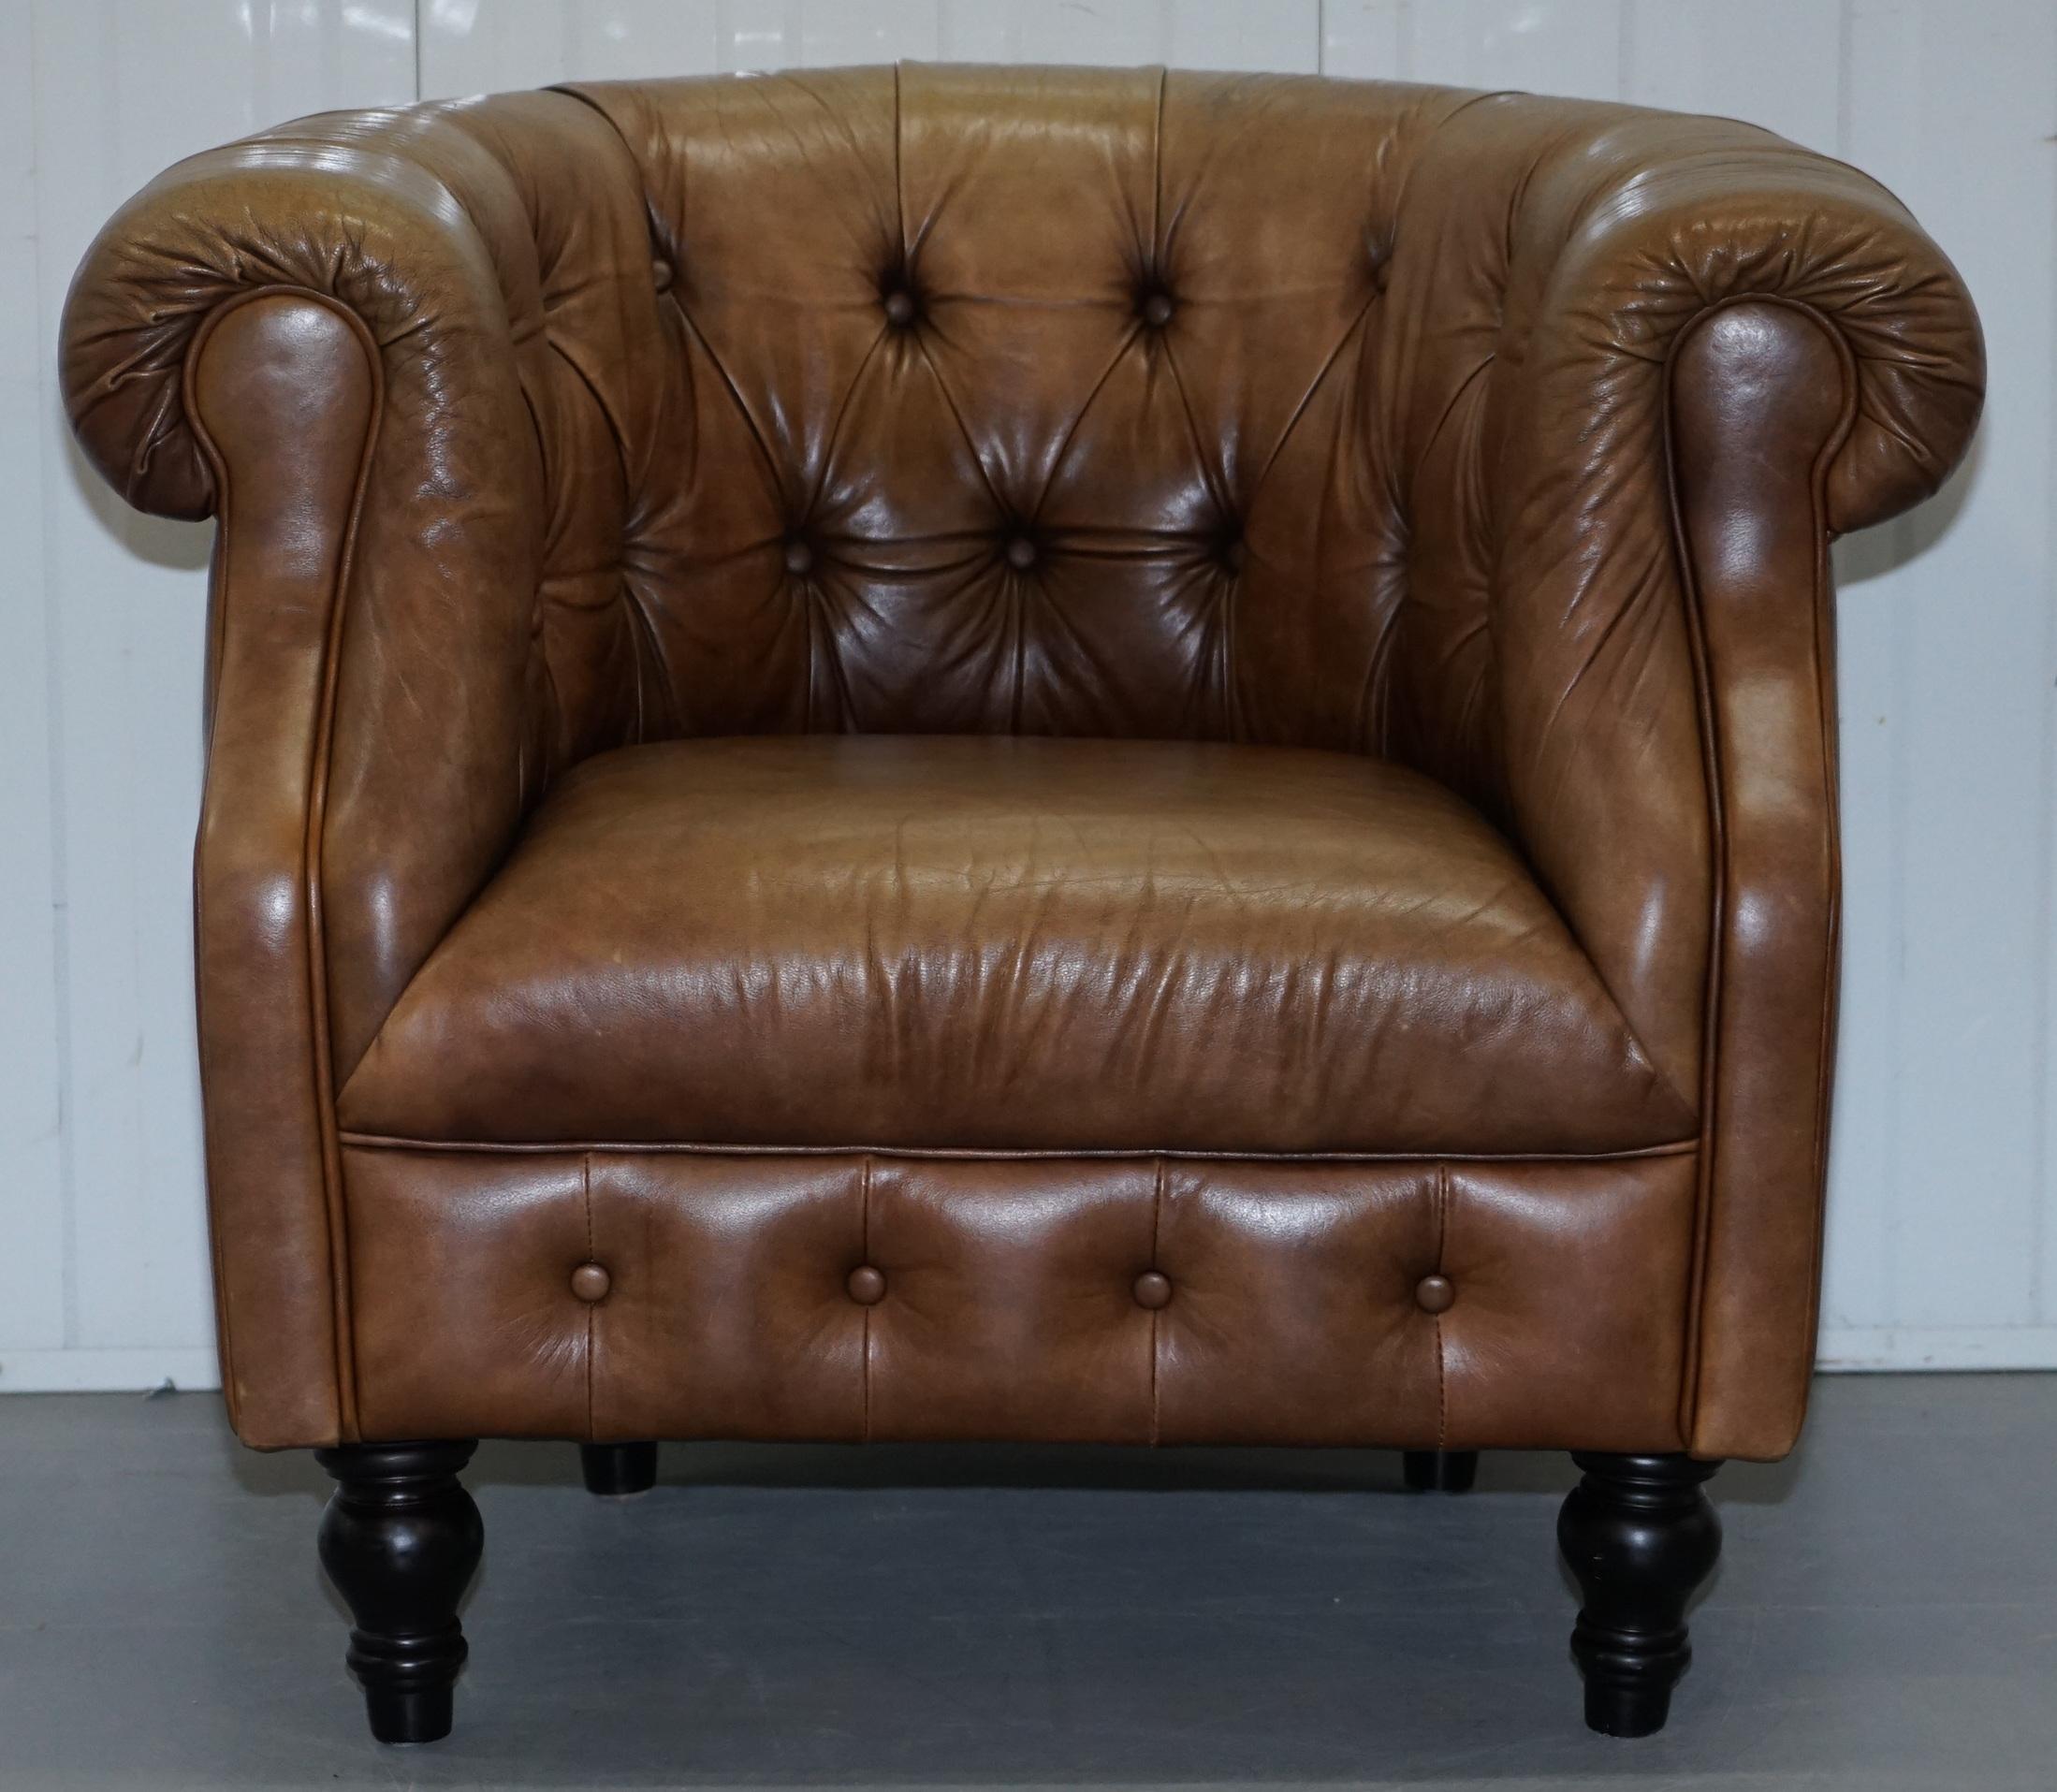 We are delighted to offer for sale this lovely vintage tan brown leather club tub armchair with Chesterfield buttoning

A good looking and well-made armchair, great proportions and looks fantastic from every angle

It has a nice vintage used